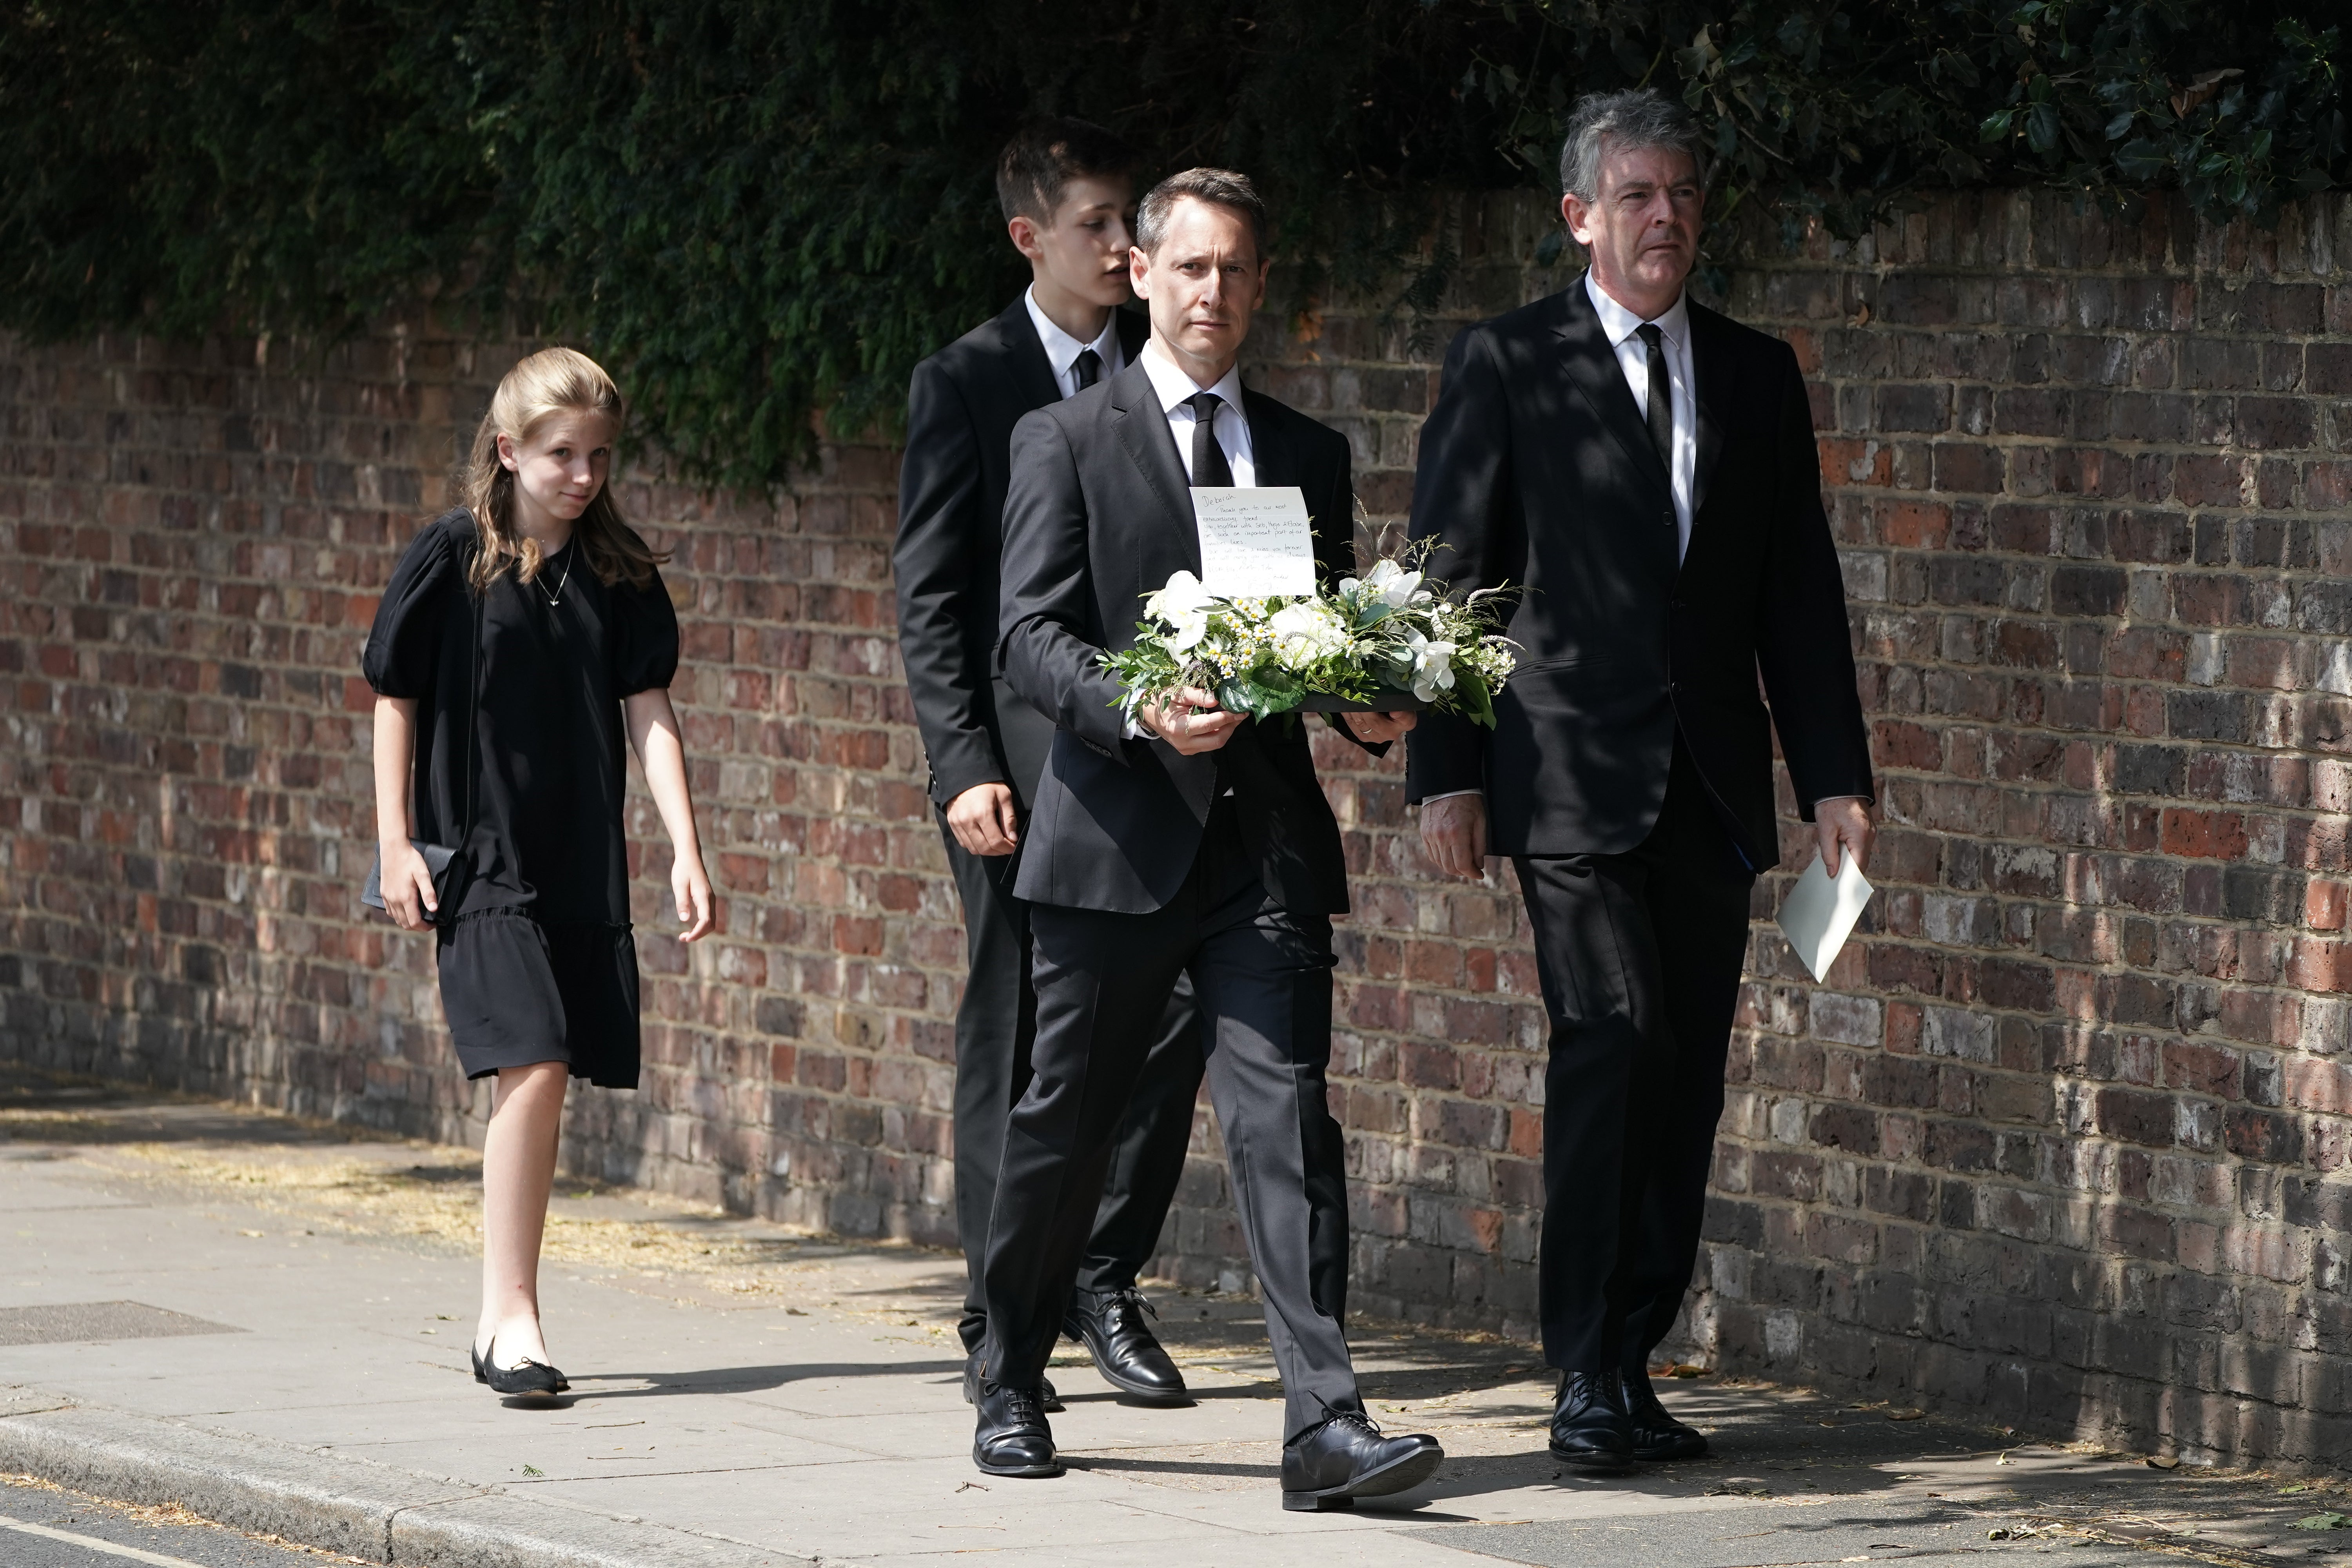 Mourners carrying flowers arrive at St Mary’s Church in Barnes, west London, for the funeral of Dame Deborah James (Aaron Chown/PA)